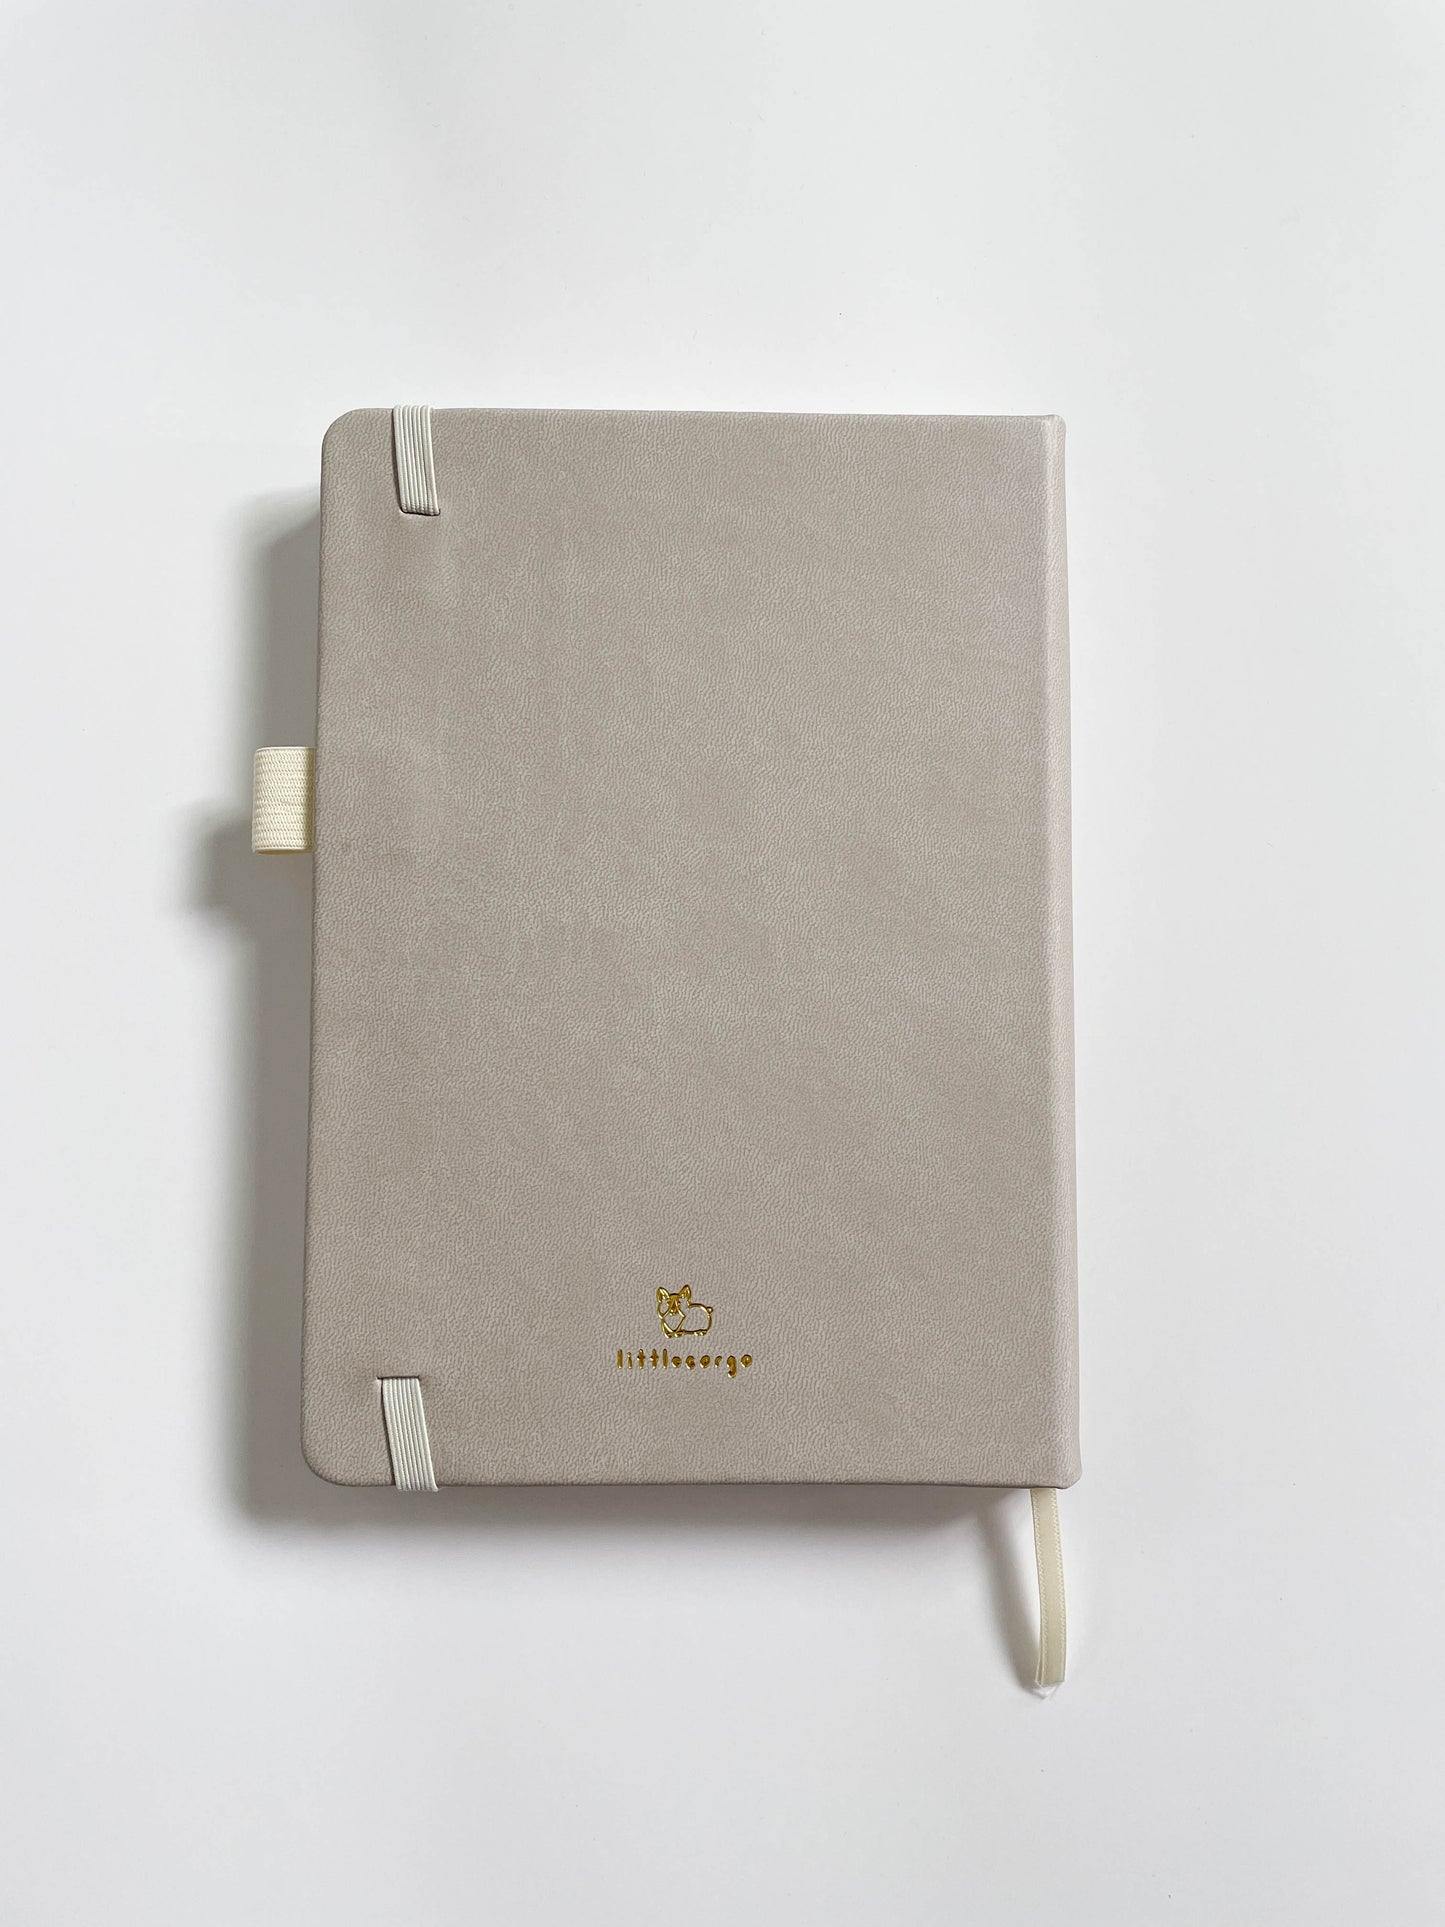 The back side of an ivory bullet journal that has a gold foil embossed design at the bottom.